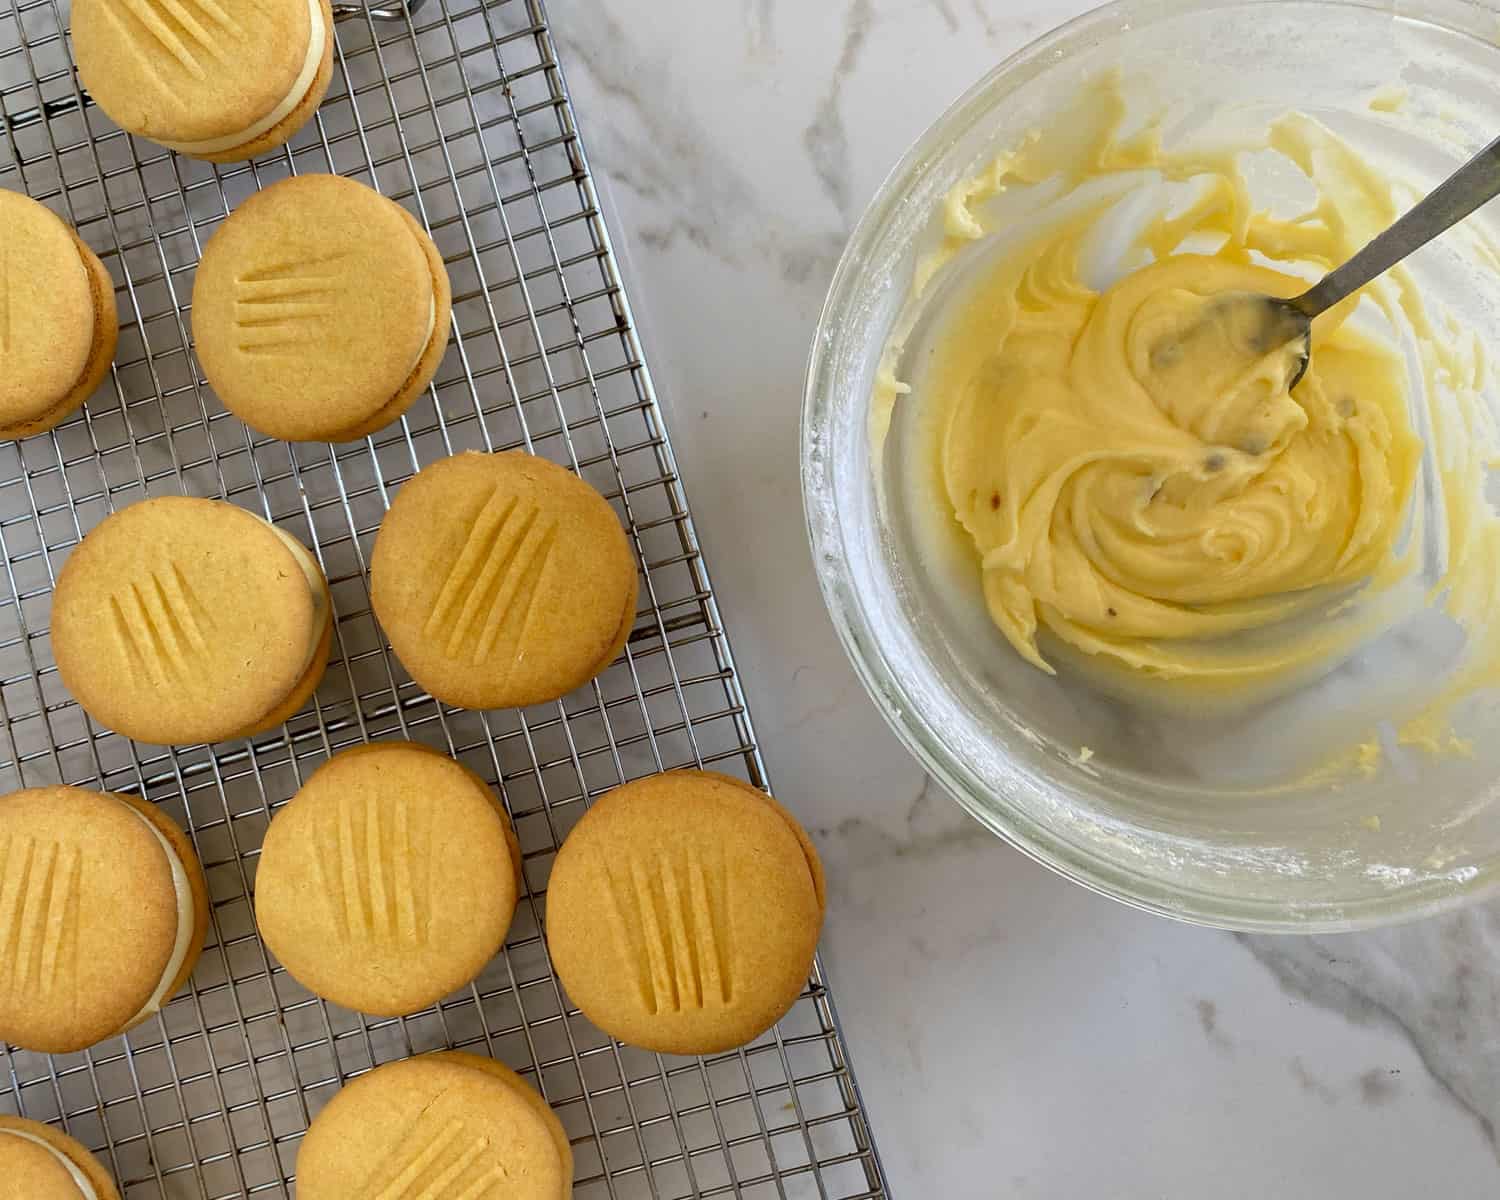 Cooked biscuits on a wire rack next to icing in a glass bowl.